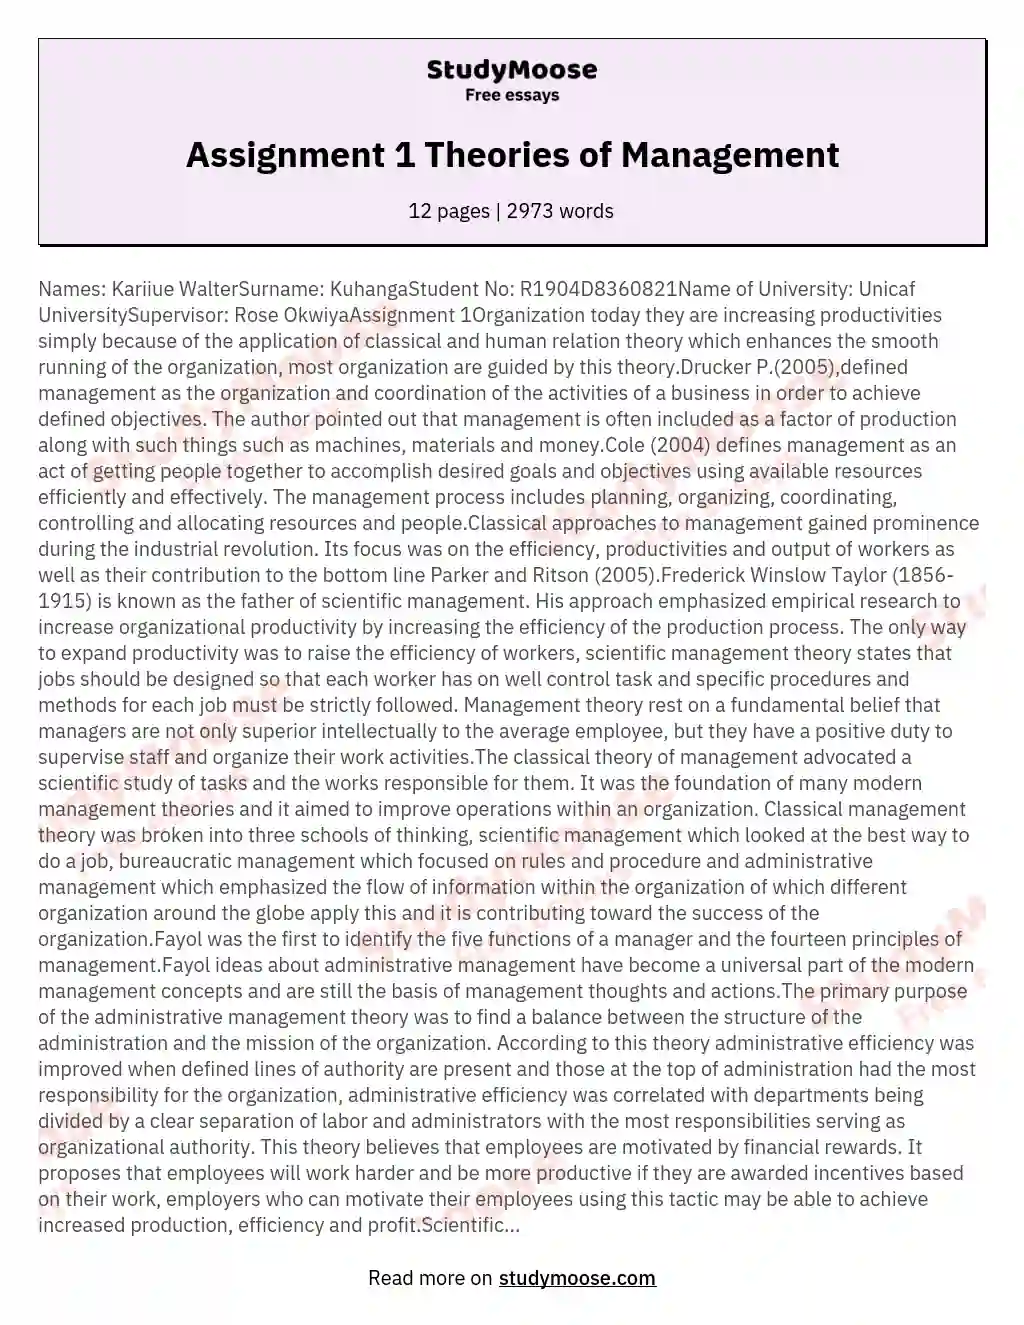 management theories essay questions